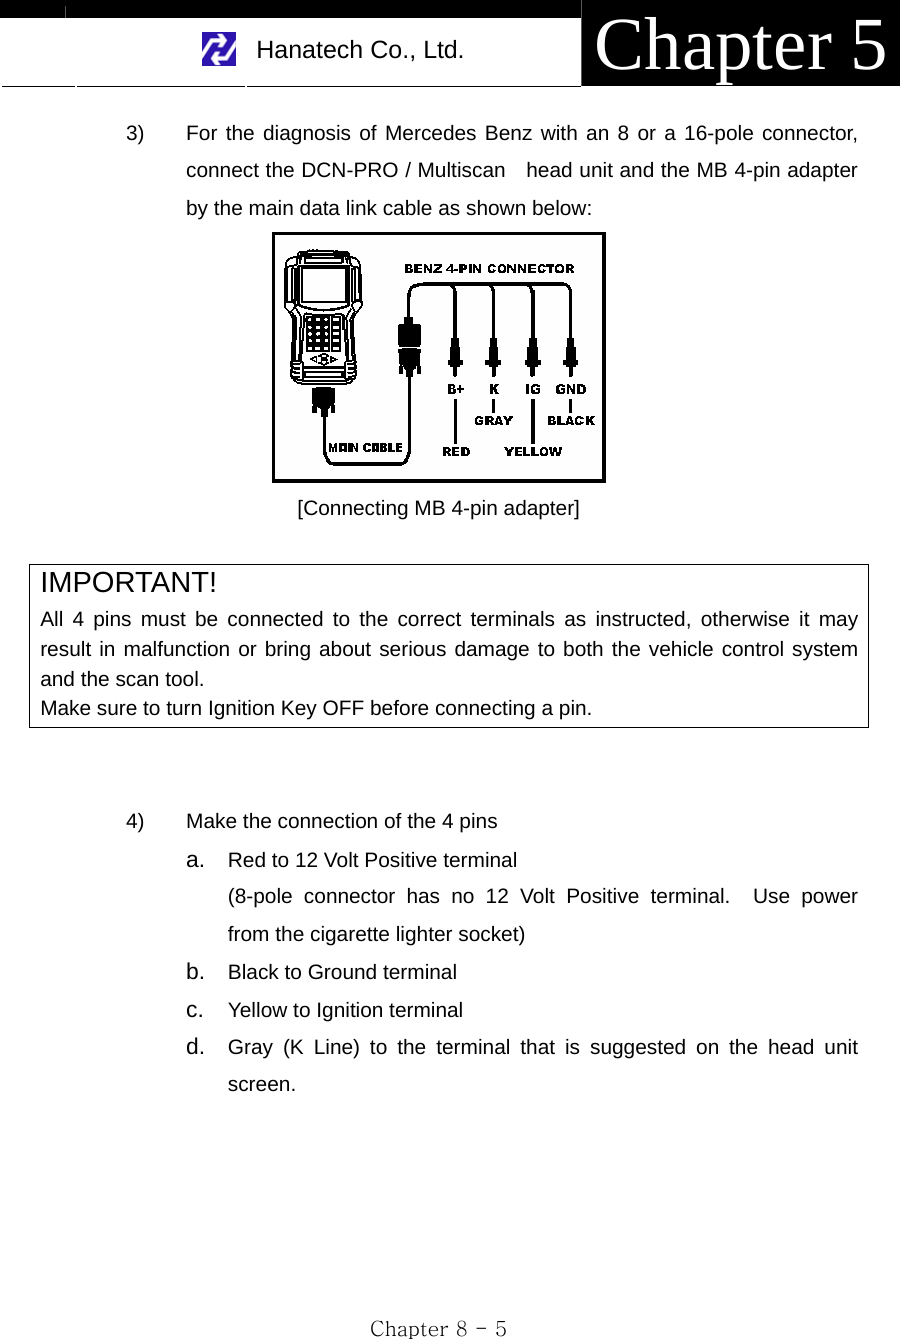     Hanatech Co., Ltd.  Chapter 5 Chapter 8 - 5 3)  For the diagnosis of Mercedes Benz with an 8 or a 16-pole connector, connect the DCN-PRO / Multiscan    head unit and the MB 4-pin adapter by the main data link cable as shown below:    [Connecting MB 4-pin adapter]  IMPORTANT! All 4 pins must be connected to the correct terminals as instructed, otherwise it may result in malfunction or bring about serious damage to both the vehicle control system and the scan tool. Make sure to turn Ignition Key OFF before connecting a pin.   4)  Make the connection of the 4 pins   a.  Red to 12 Volt Positive terminal (8-pole connector has no 12 Volt Positive terminal.  Use power from the cigarette lighter socket) b.  Black to Ground terminal c.  Yellow to Ignition terminal d.  Gray (K Line) to the terminal that is suggested on the head unit screen.    